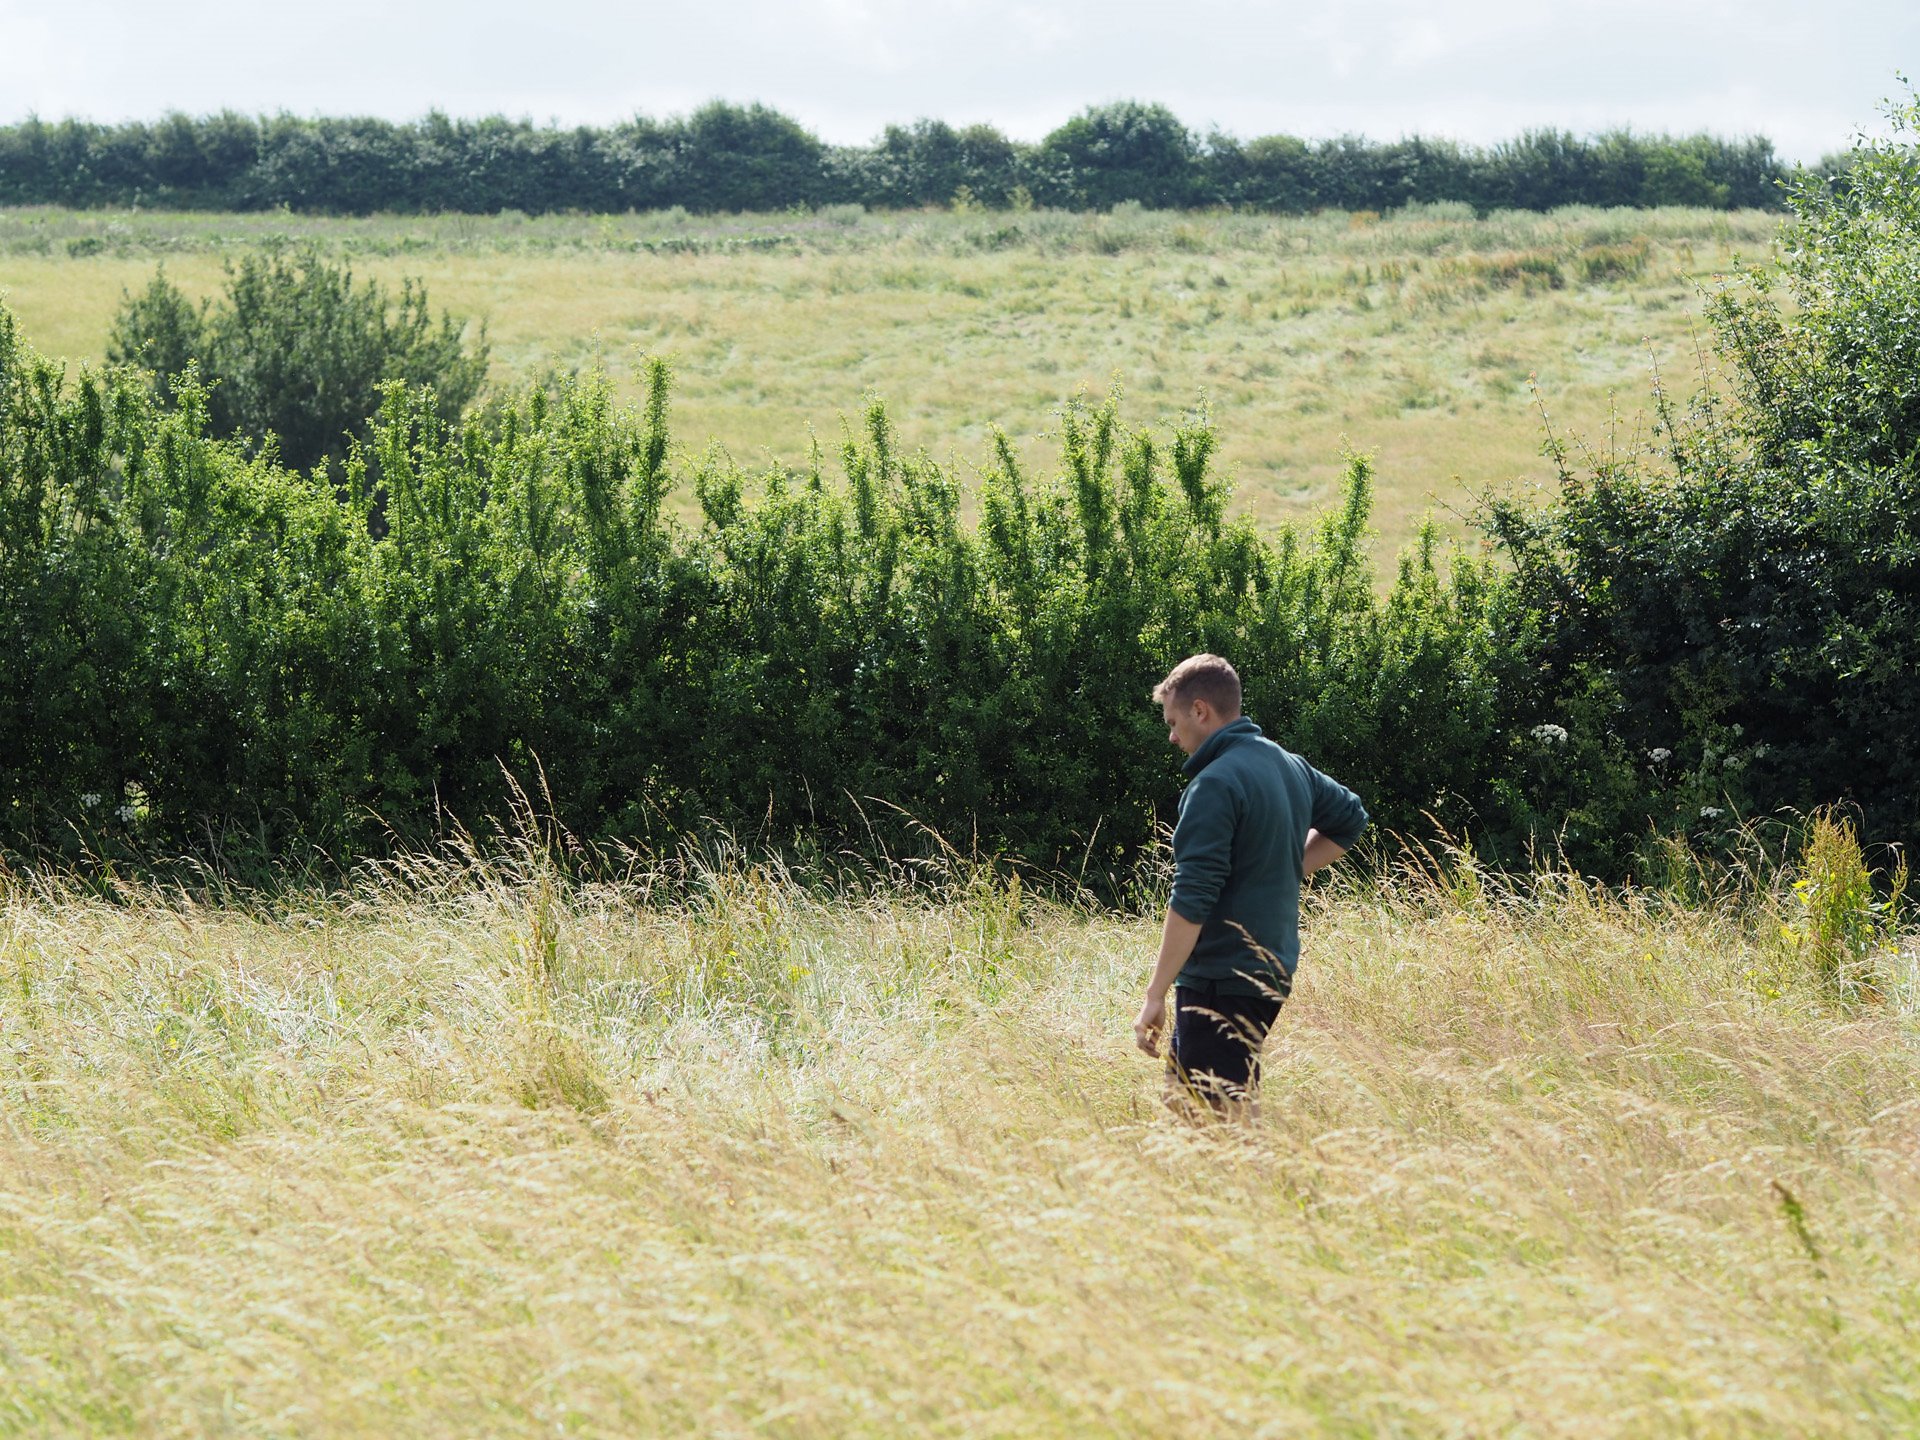 Head groundsman walking through long grasses of the rewilding land in cotswolds